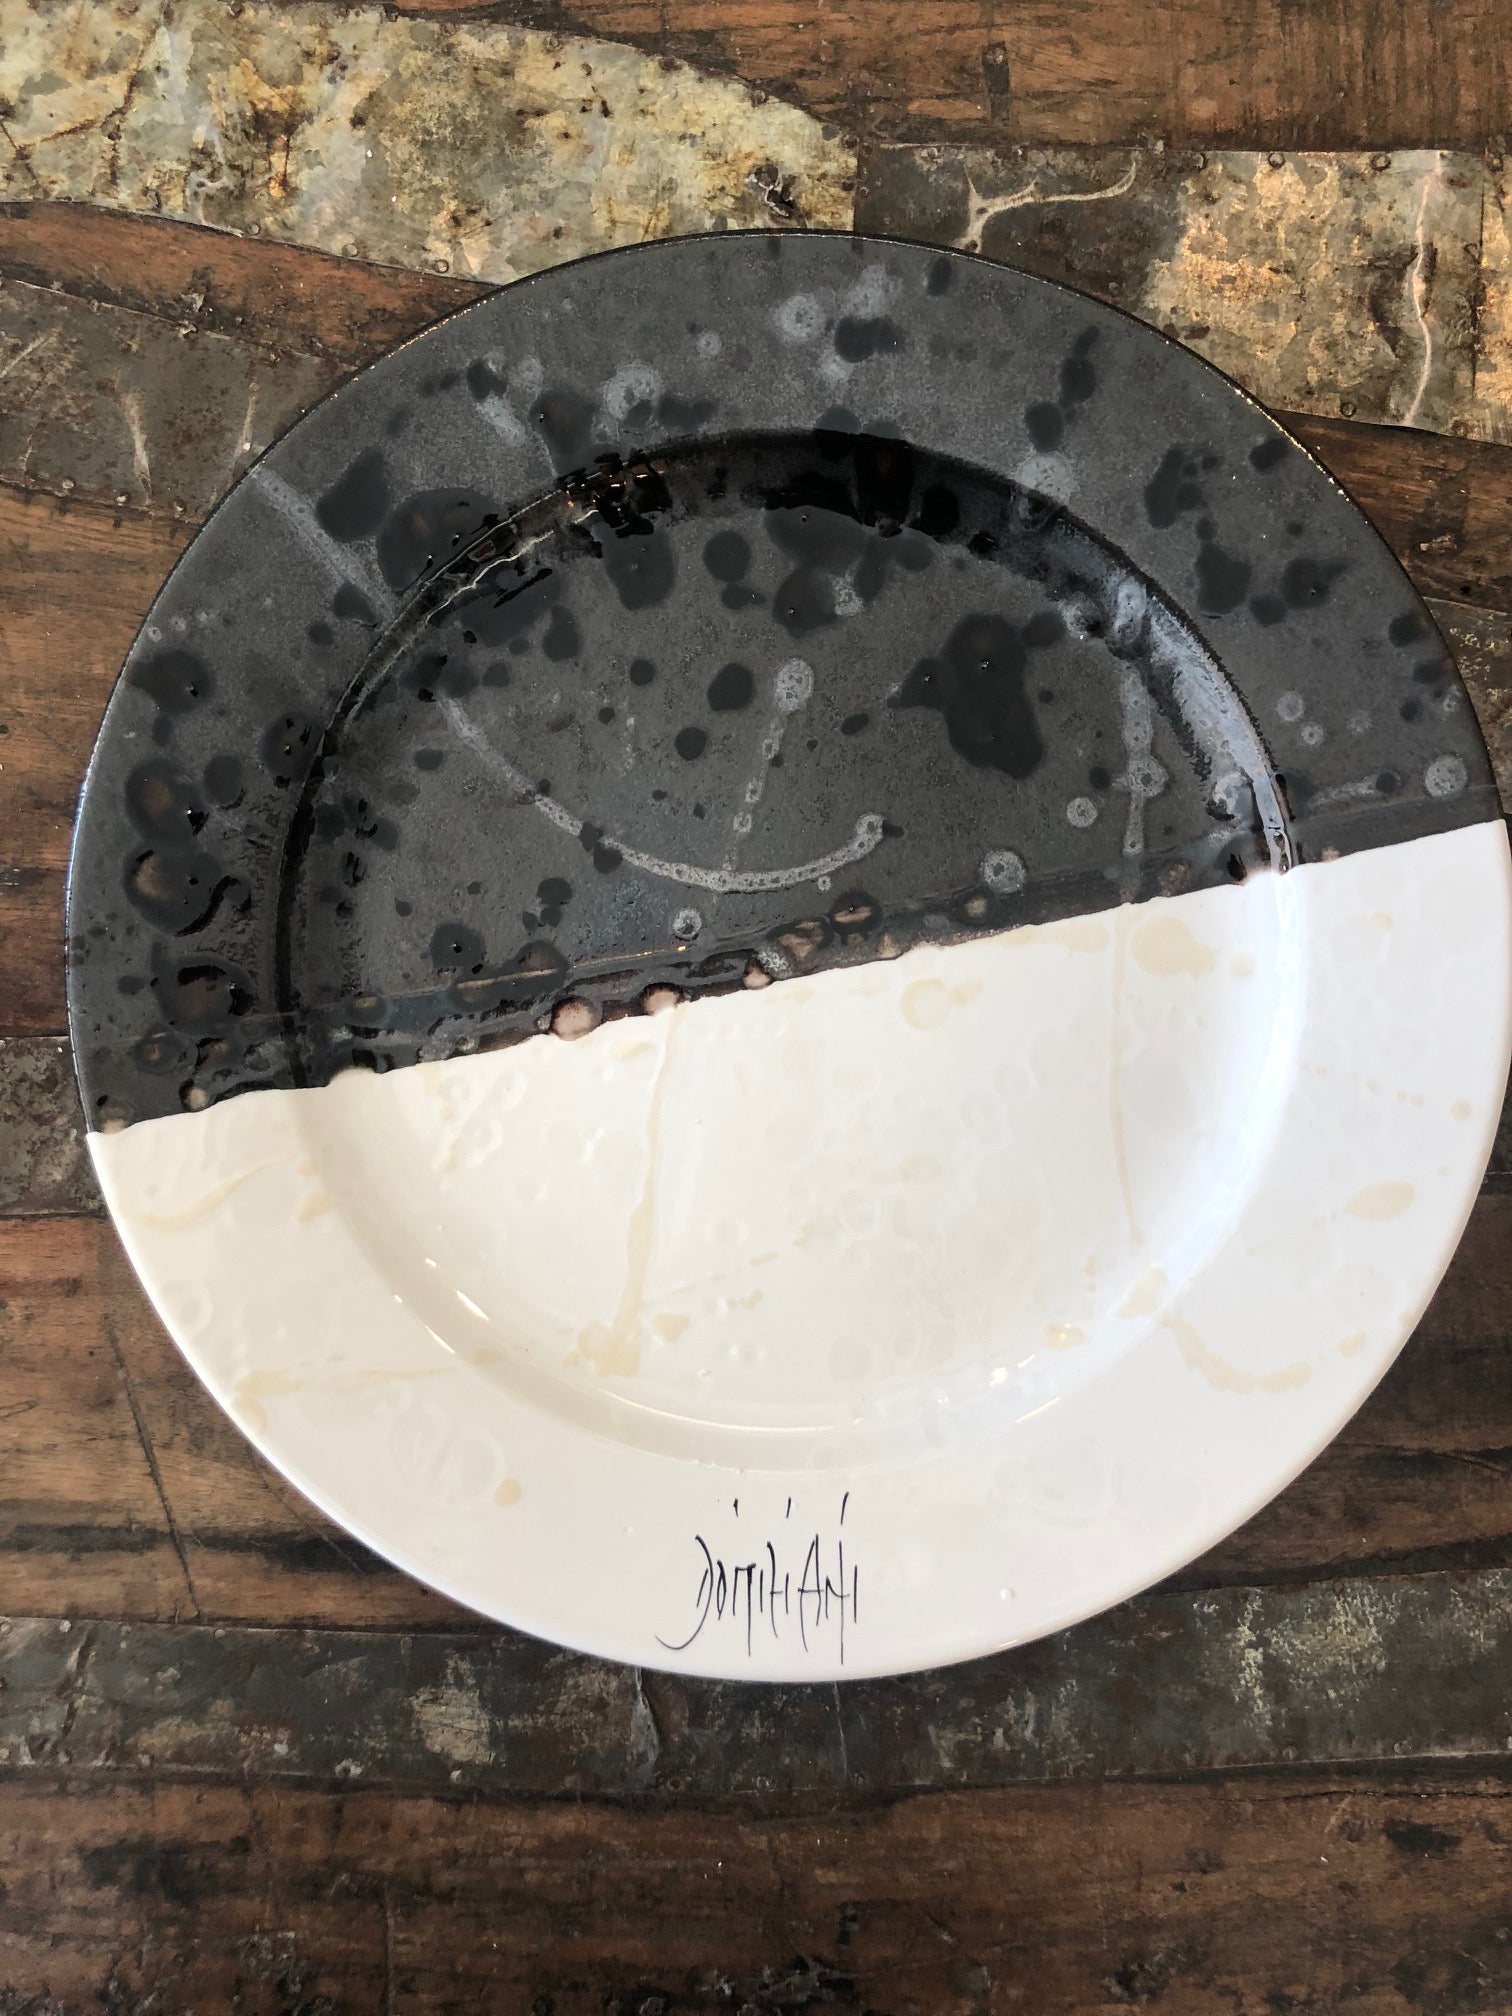 Domiziani Charger Plate COD 104, ceramics, pottery, italian design, majolica, handmade, handcrafted, handpainted, home decor, kitchen art, home goods, deruta, majolica, Artisan, treasures, traditional art, modern art, gift ideas, style, SF, shop small business, artists, shop online, landmark store, legacy, one of a kind, limited edition, gift guide, gift shop, retail shop, decorations, shopping, italy, home staging, home decorating, home interiors